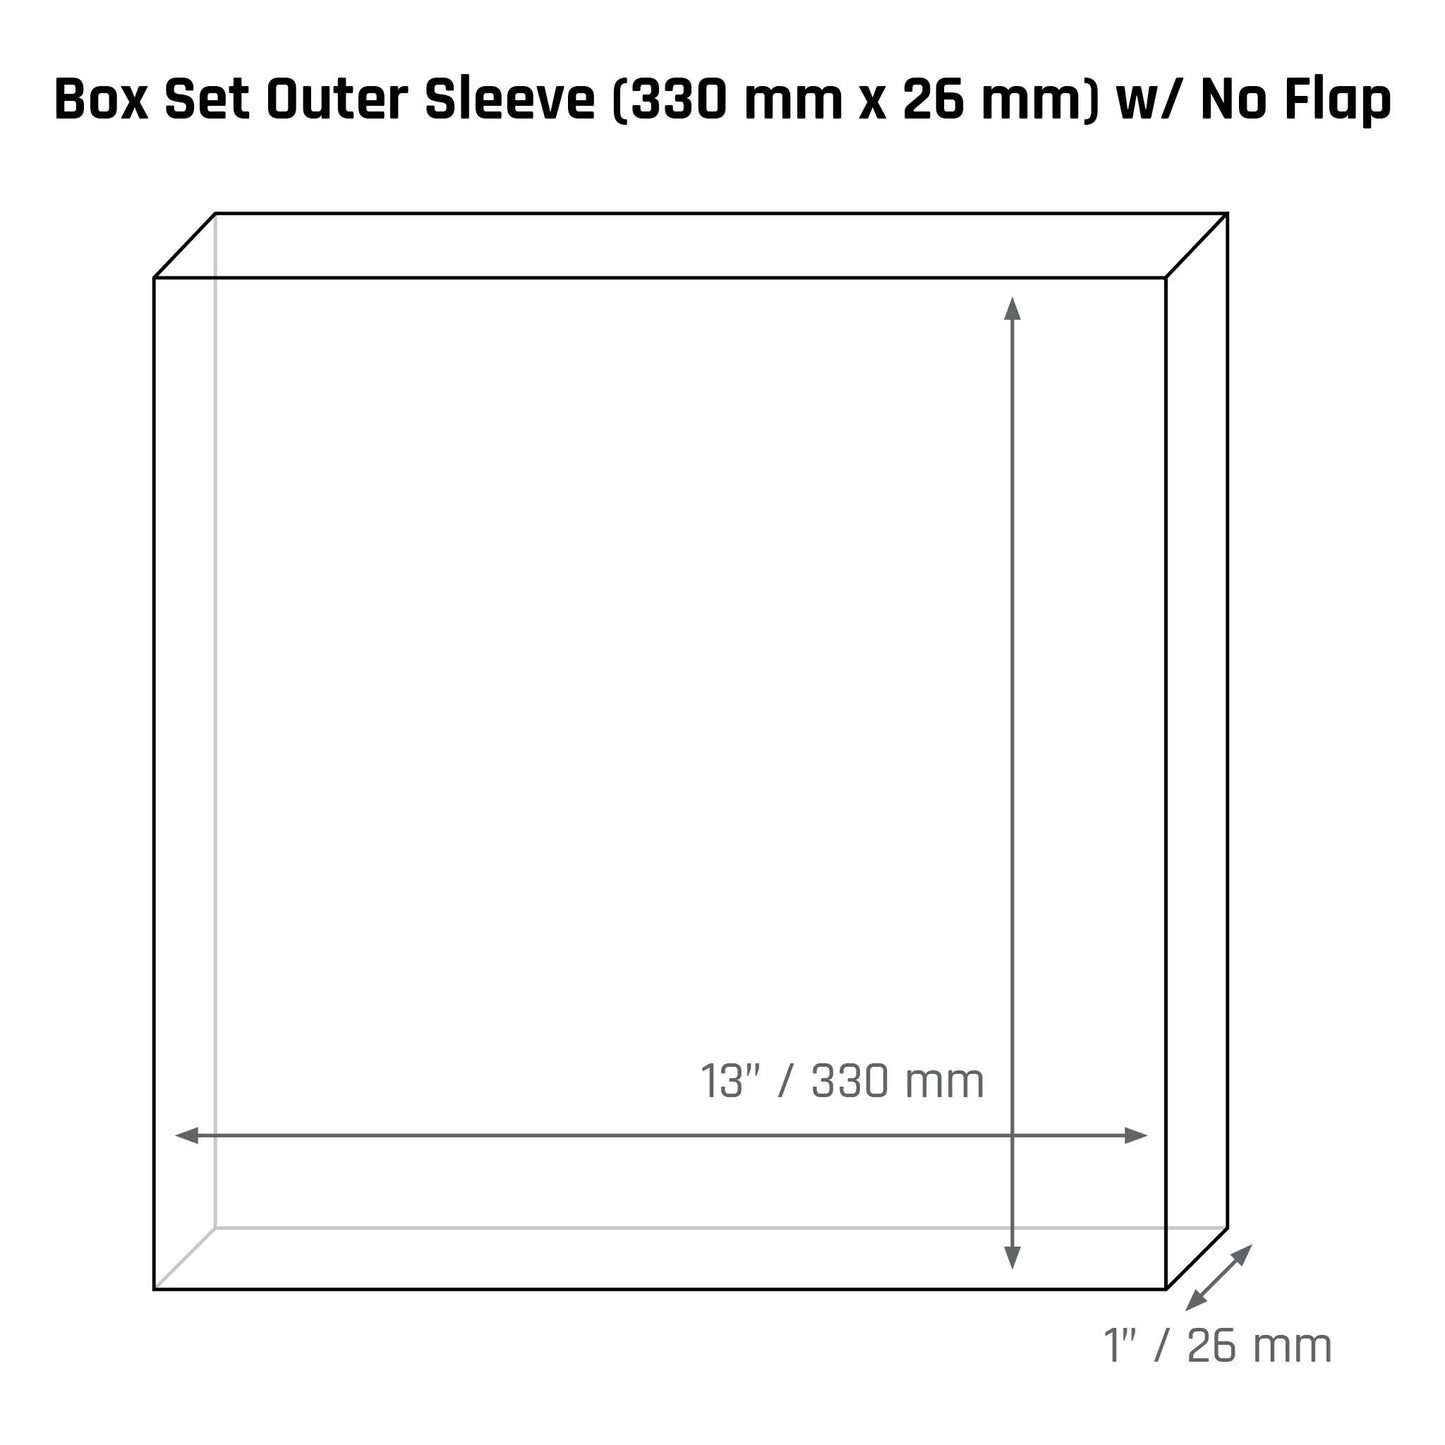 Box Set Outer Sleeve (330 mm x 26 mm) - 3mil - Vinyl Storage Solutions